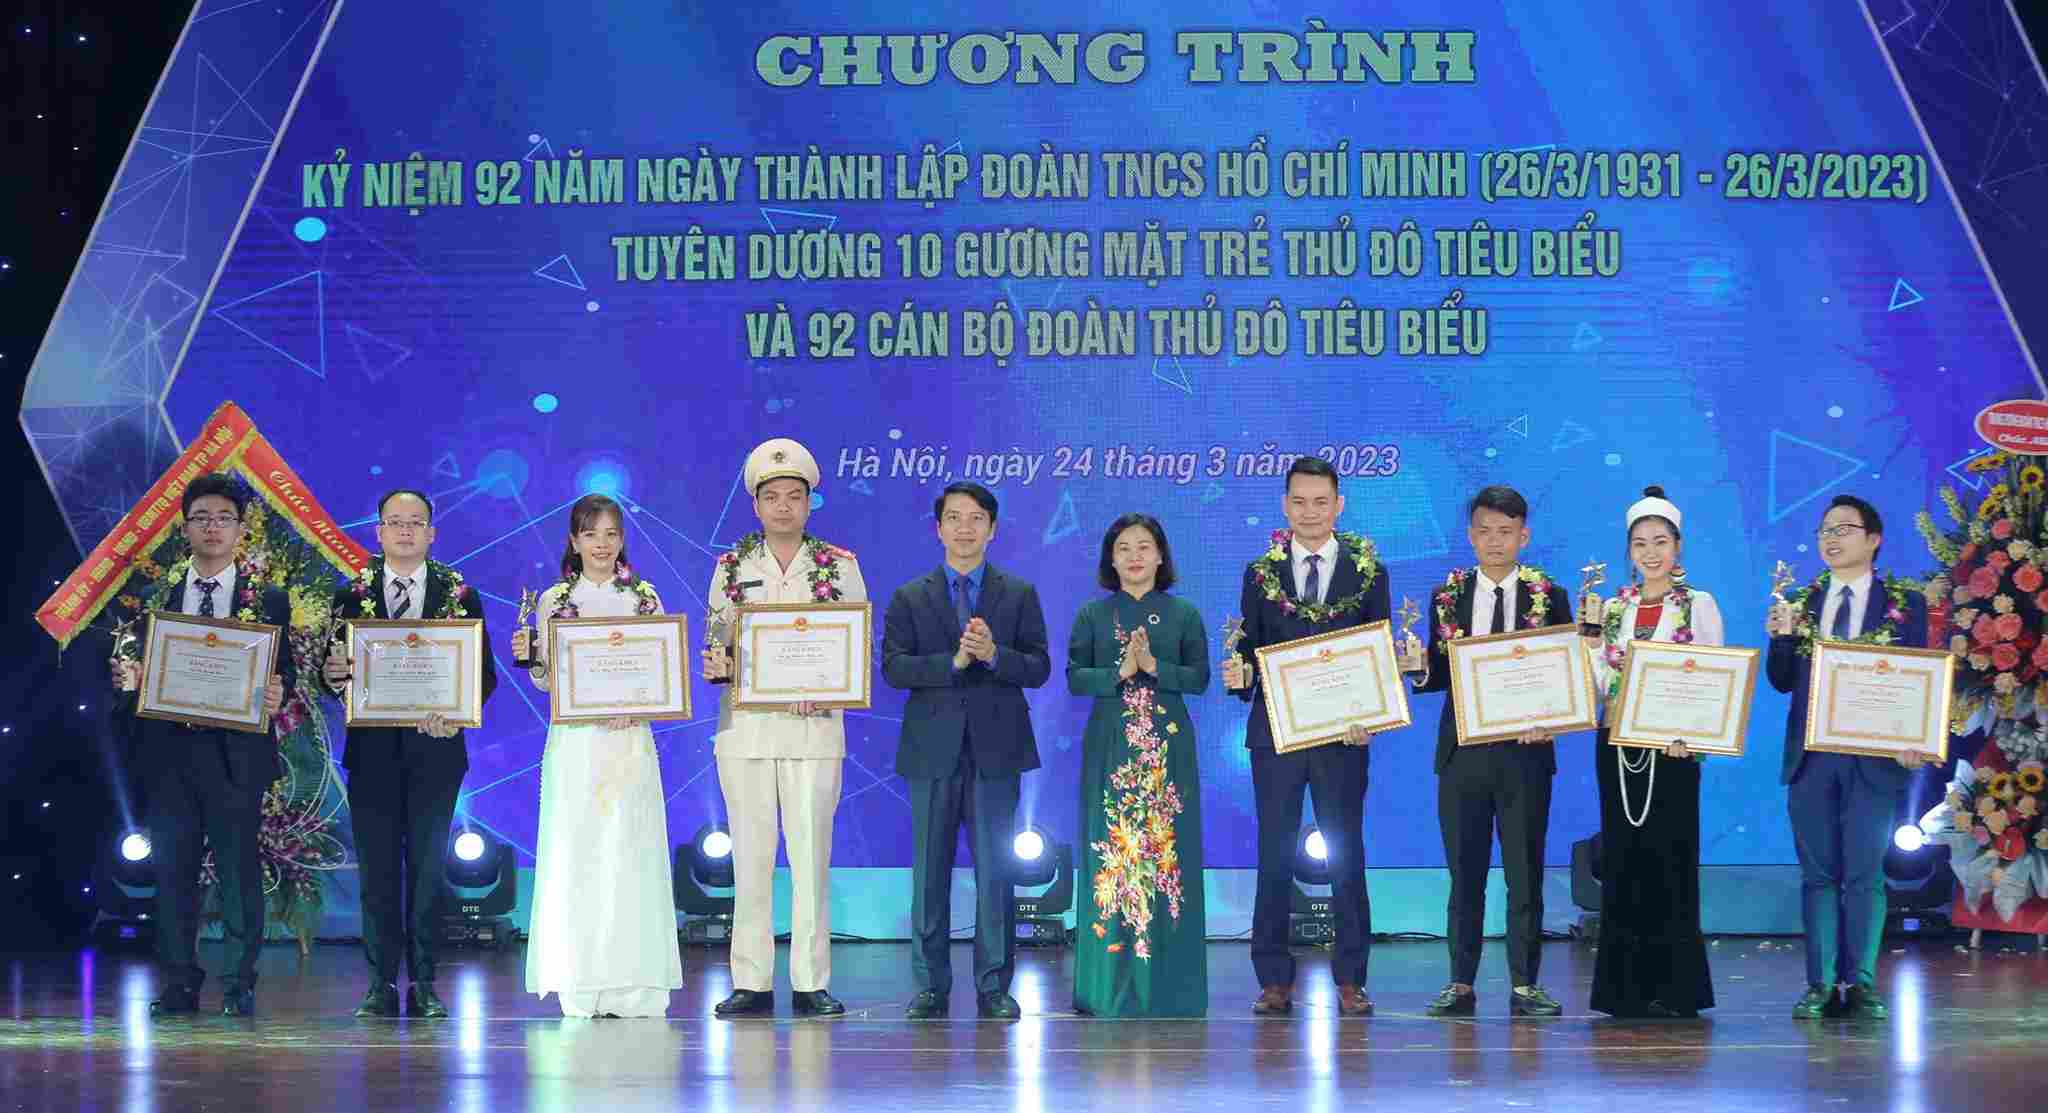 10 Outstanding Young Faces of Hanoi in 2022